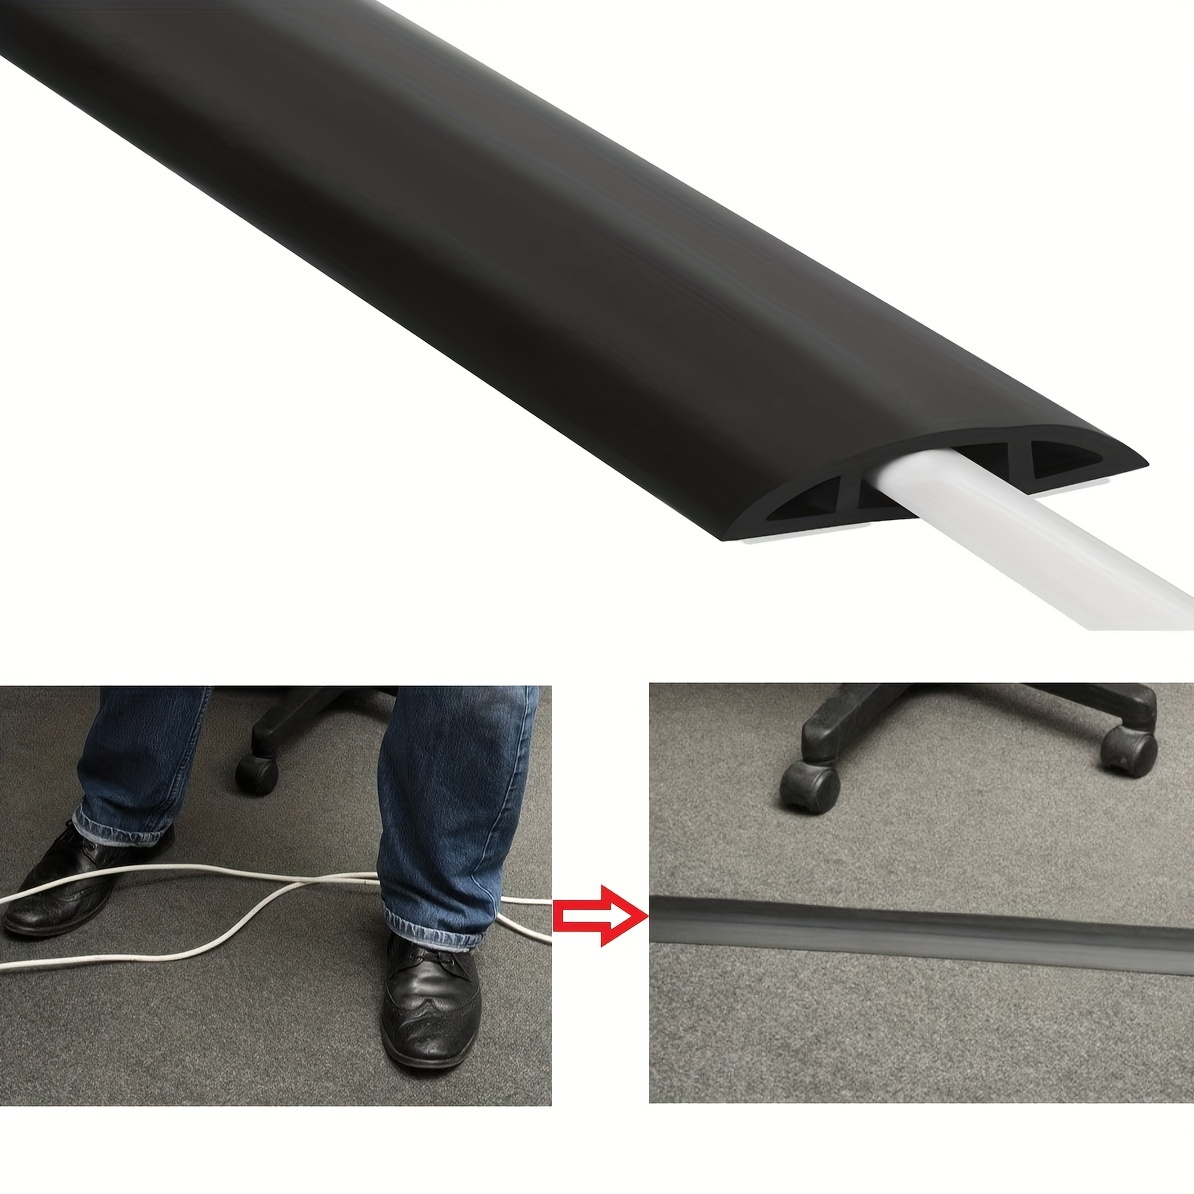 Cord Cover Floor 6ft White, Floor Cable Cover Extension Cord Hider, Floor  Cord Protector Prevent Cable Trips & Protect Wires, Floor Cable Management